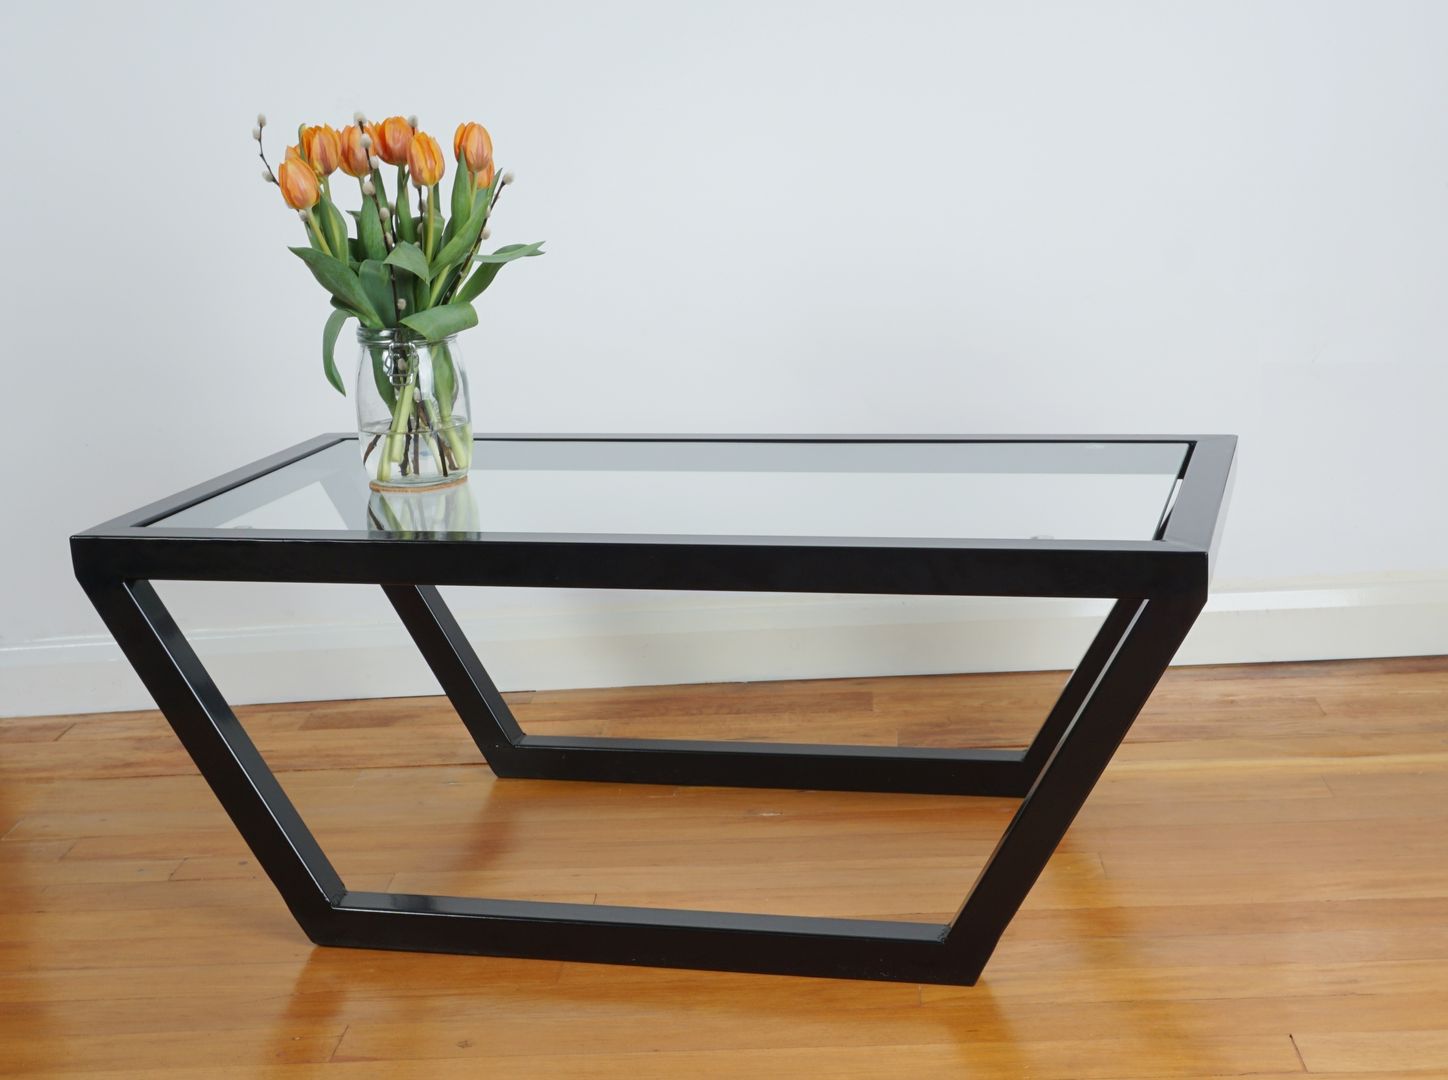 Glass and Steel Coffee Table Urban Metalworks Living room Side tables & trays